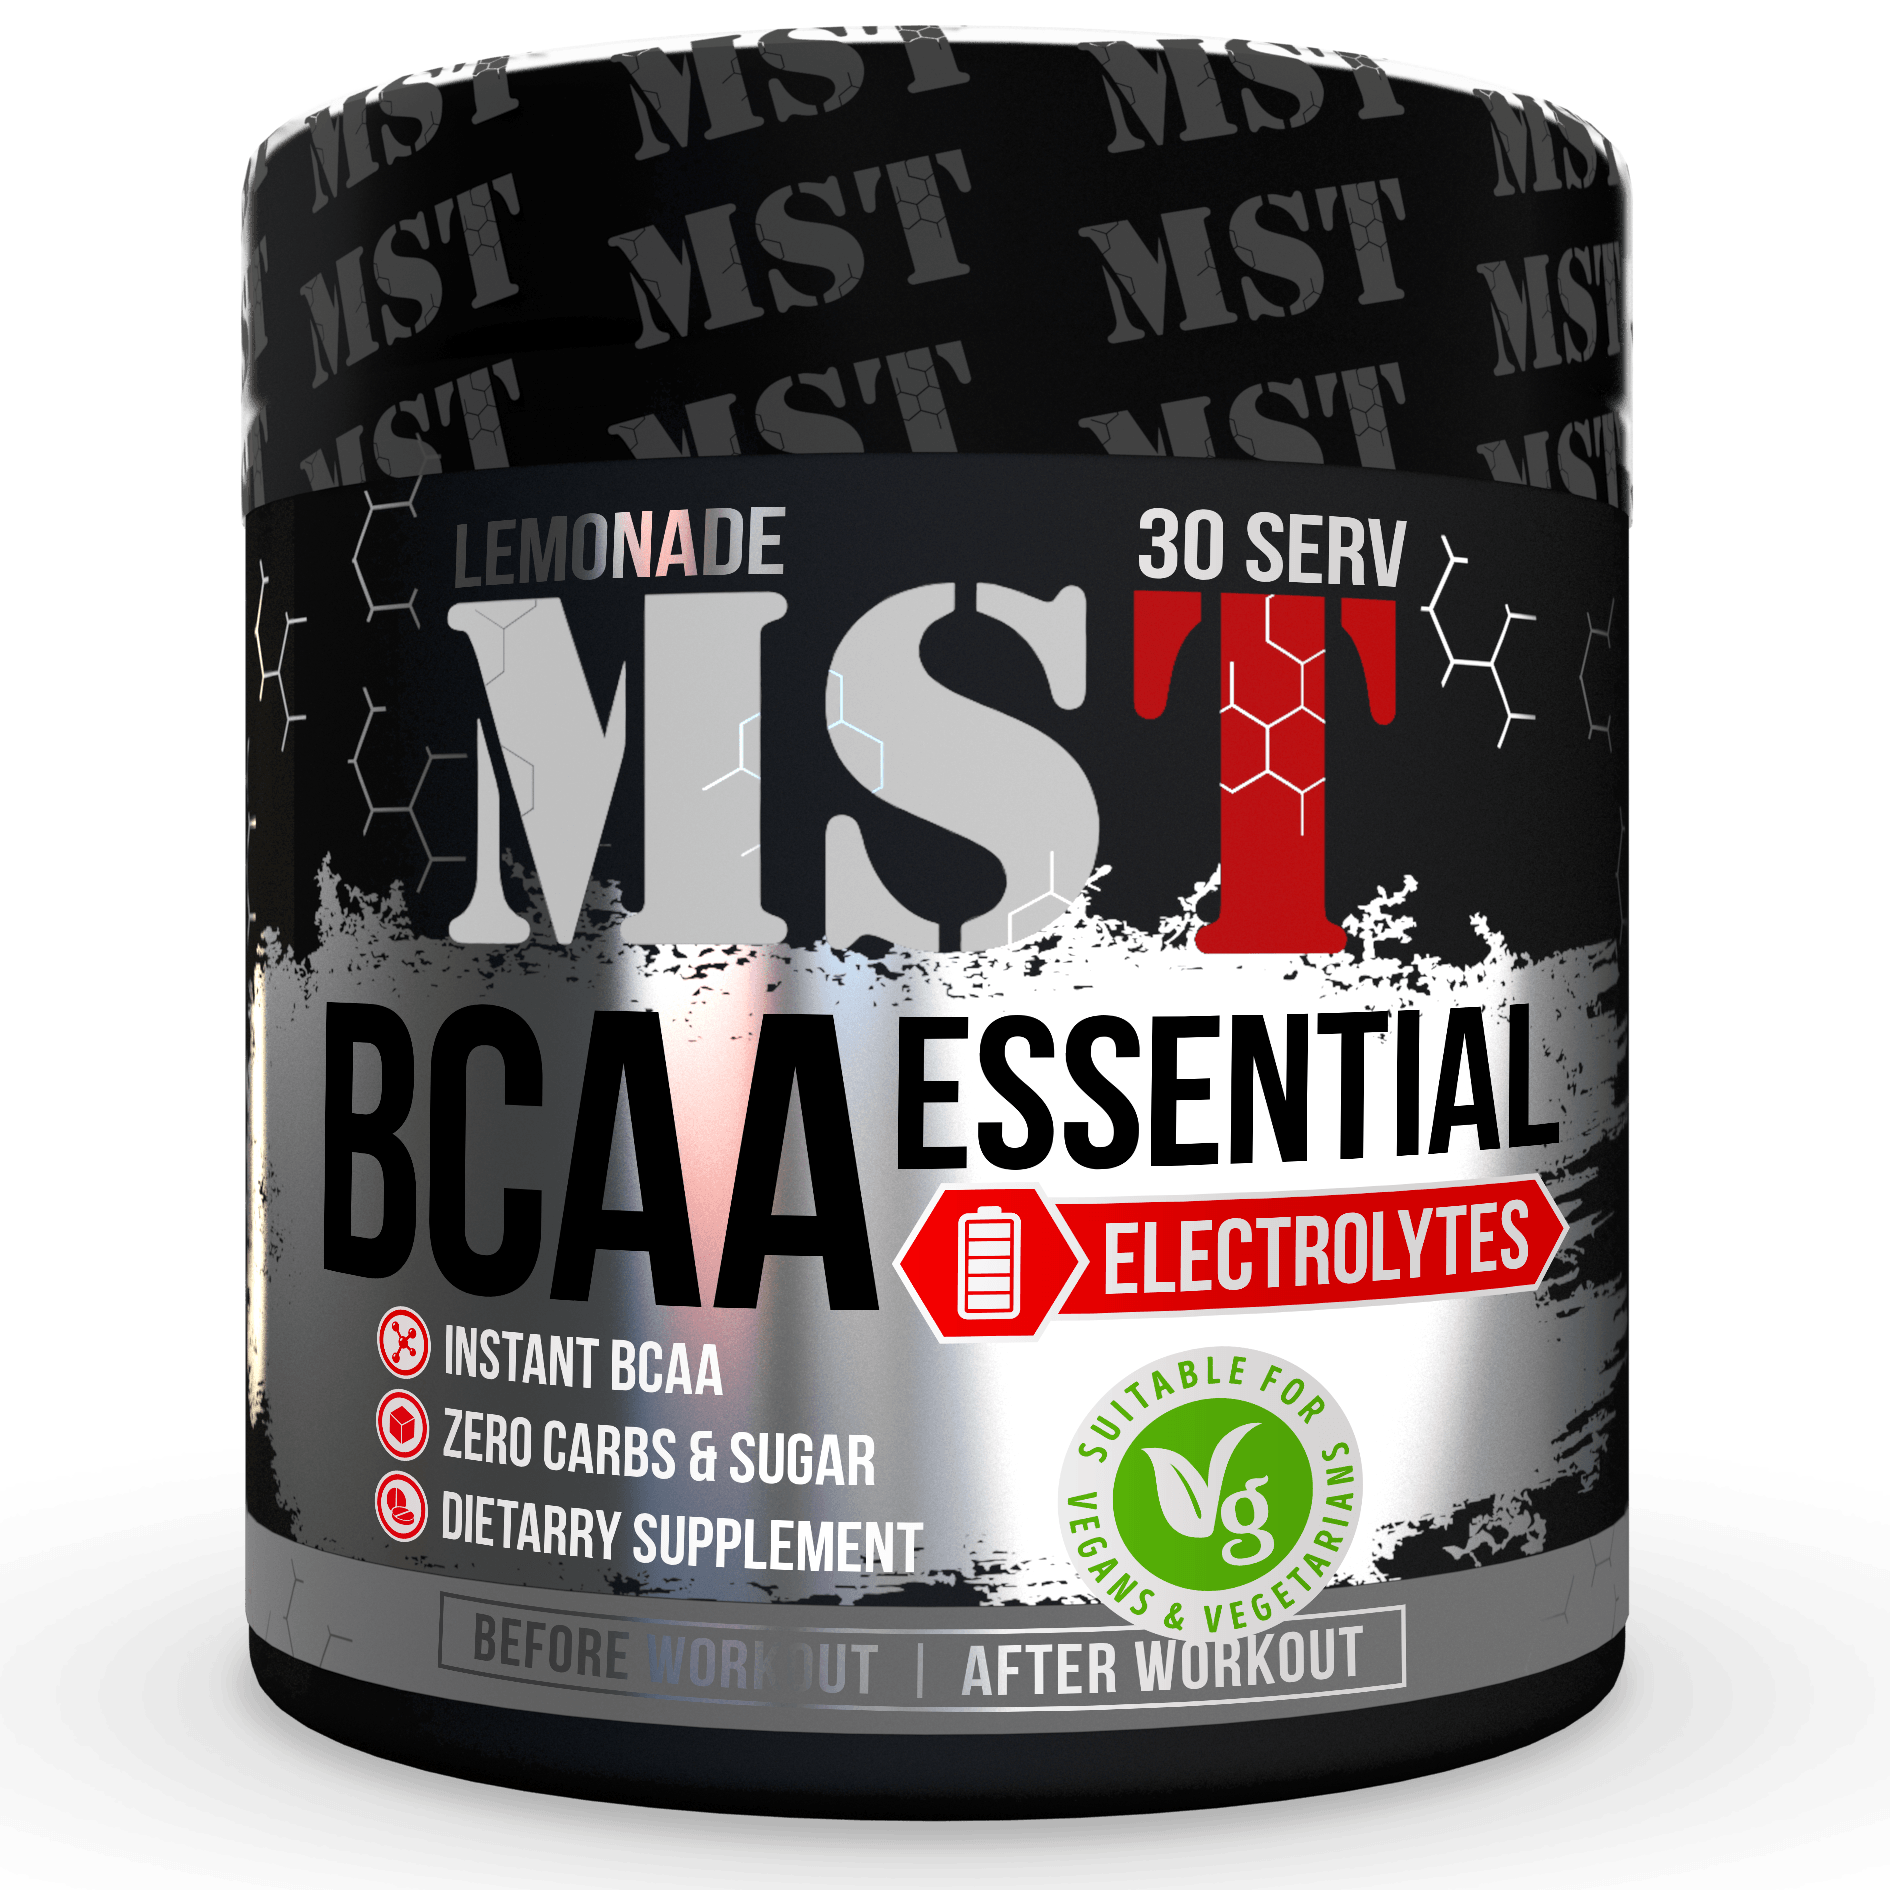 BCAA Essential Electrolytes, 240 g, MST Nutrition. BCAA. Weight Loss recovery Anti-catabolic properties Lean muscle mass 